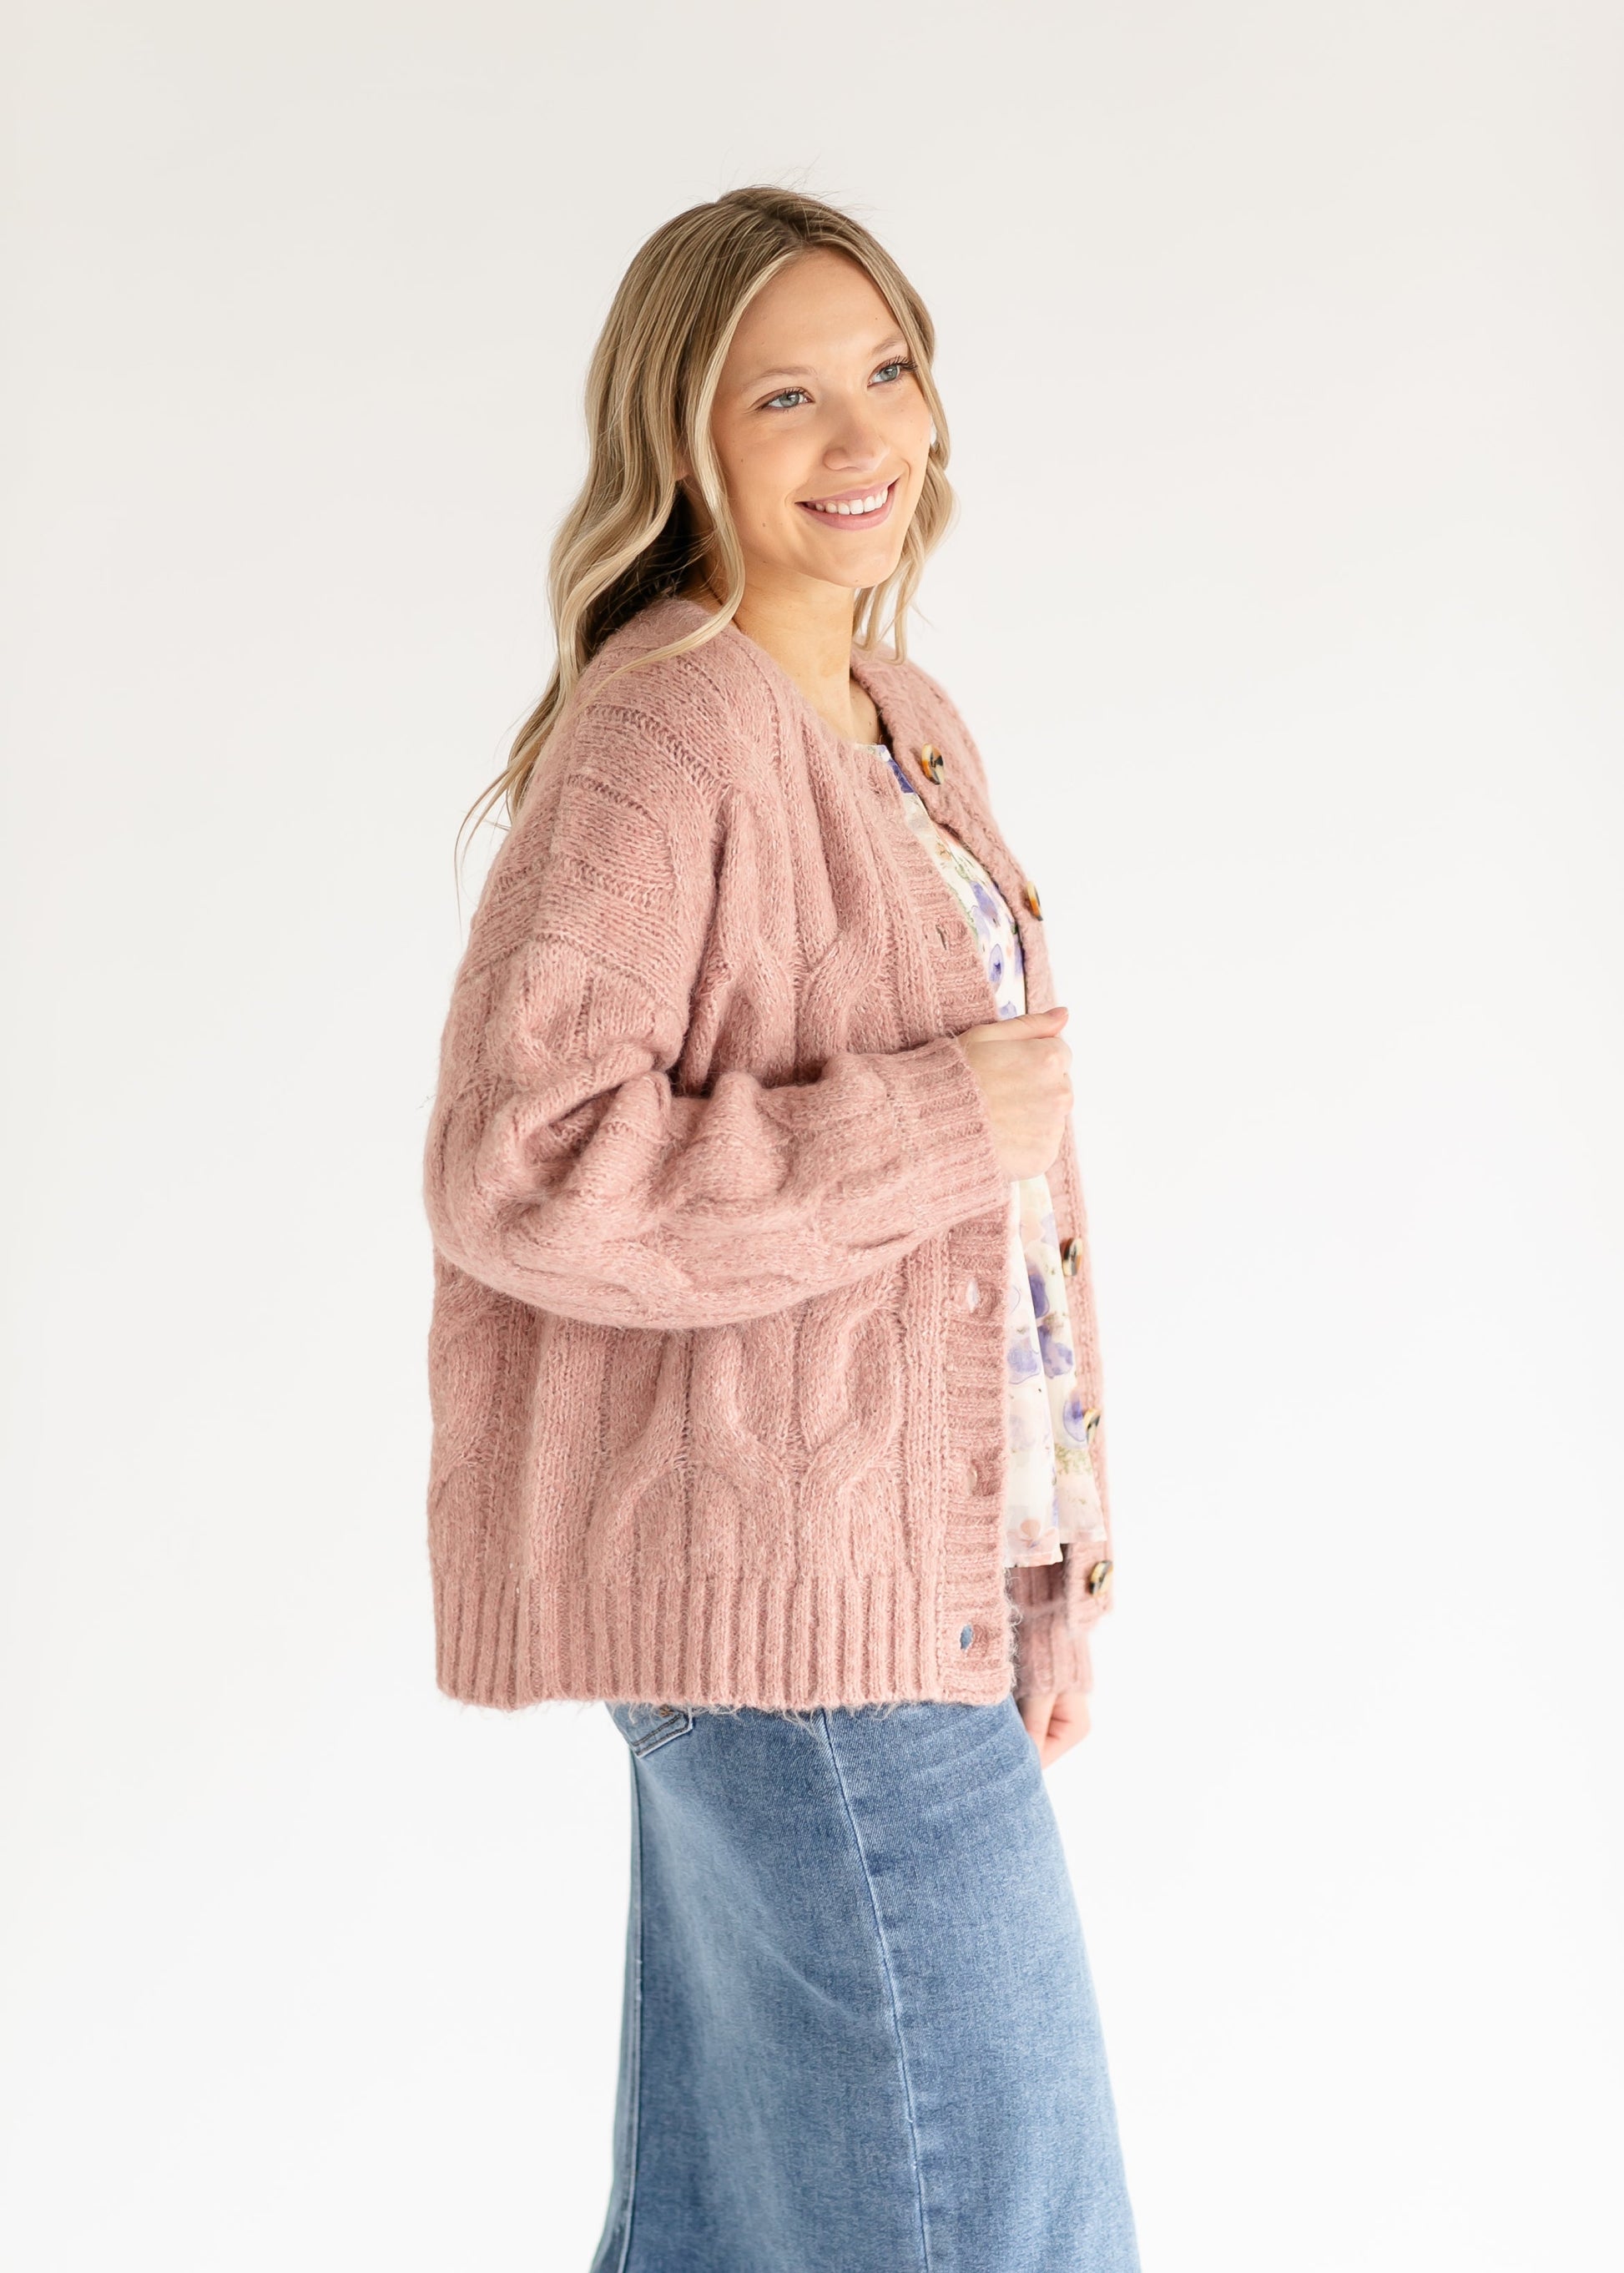 Dusty Rose Button Front Cardigan FF Tops